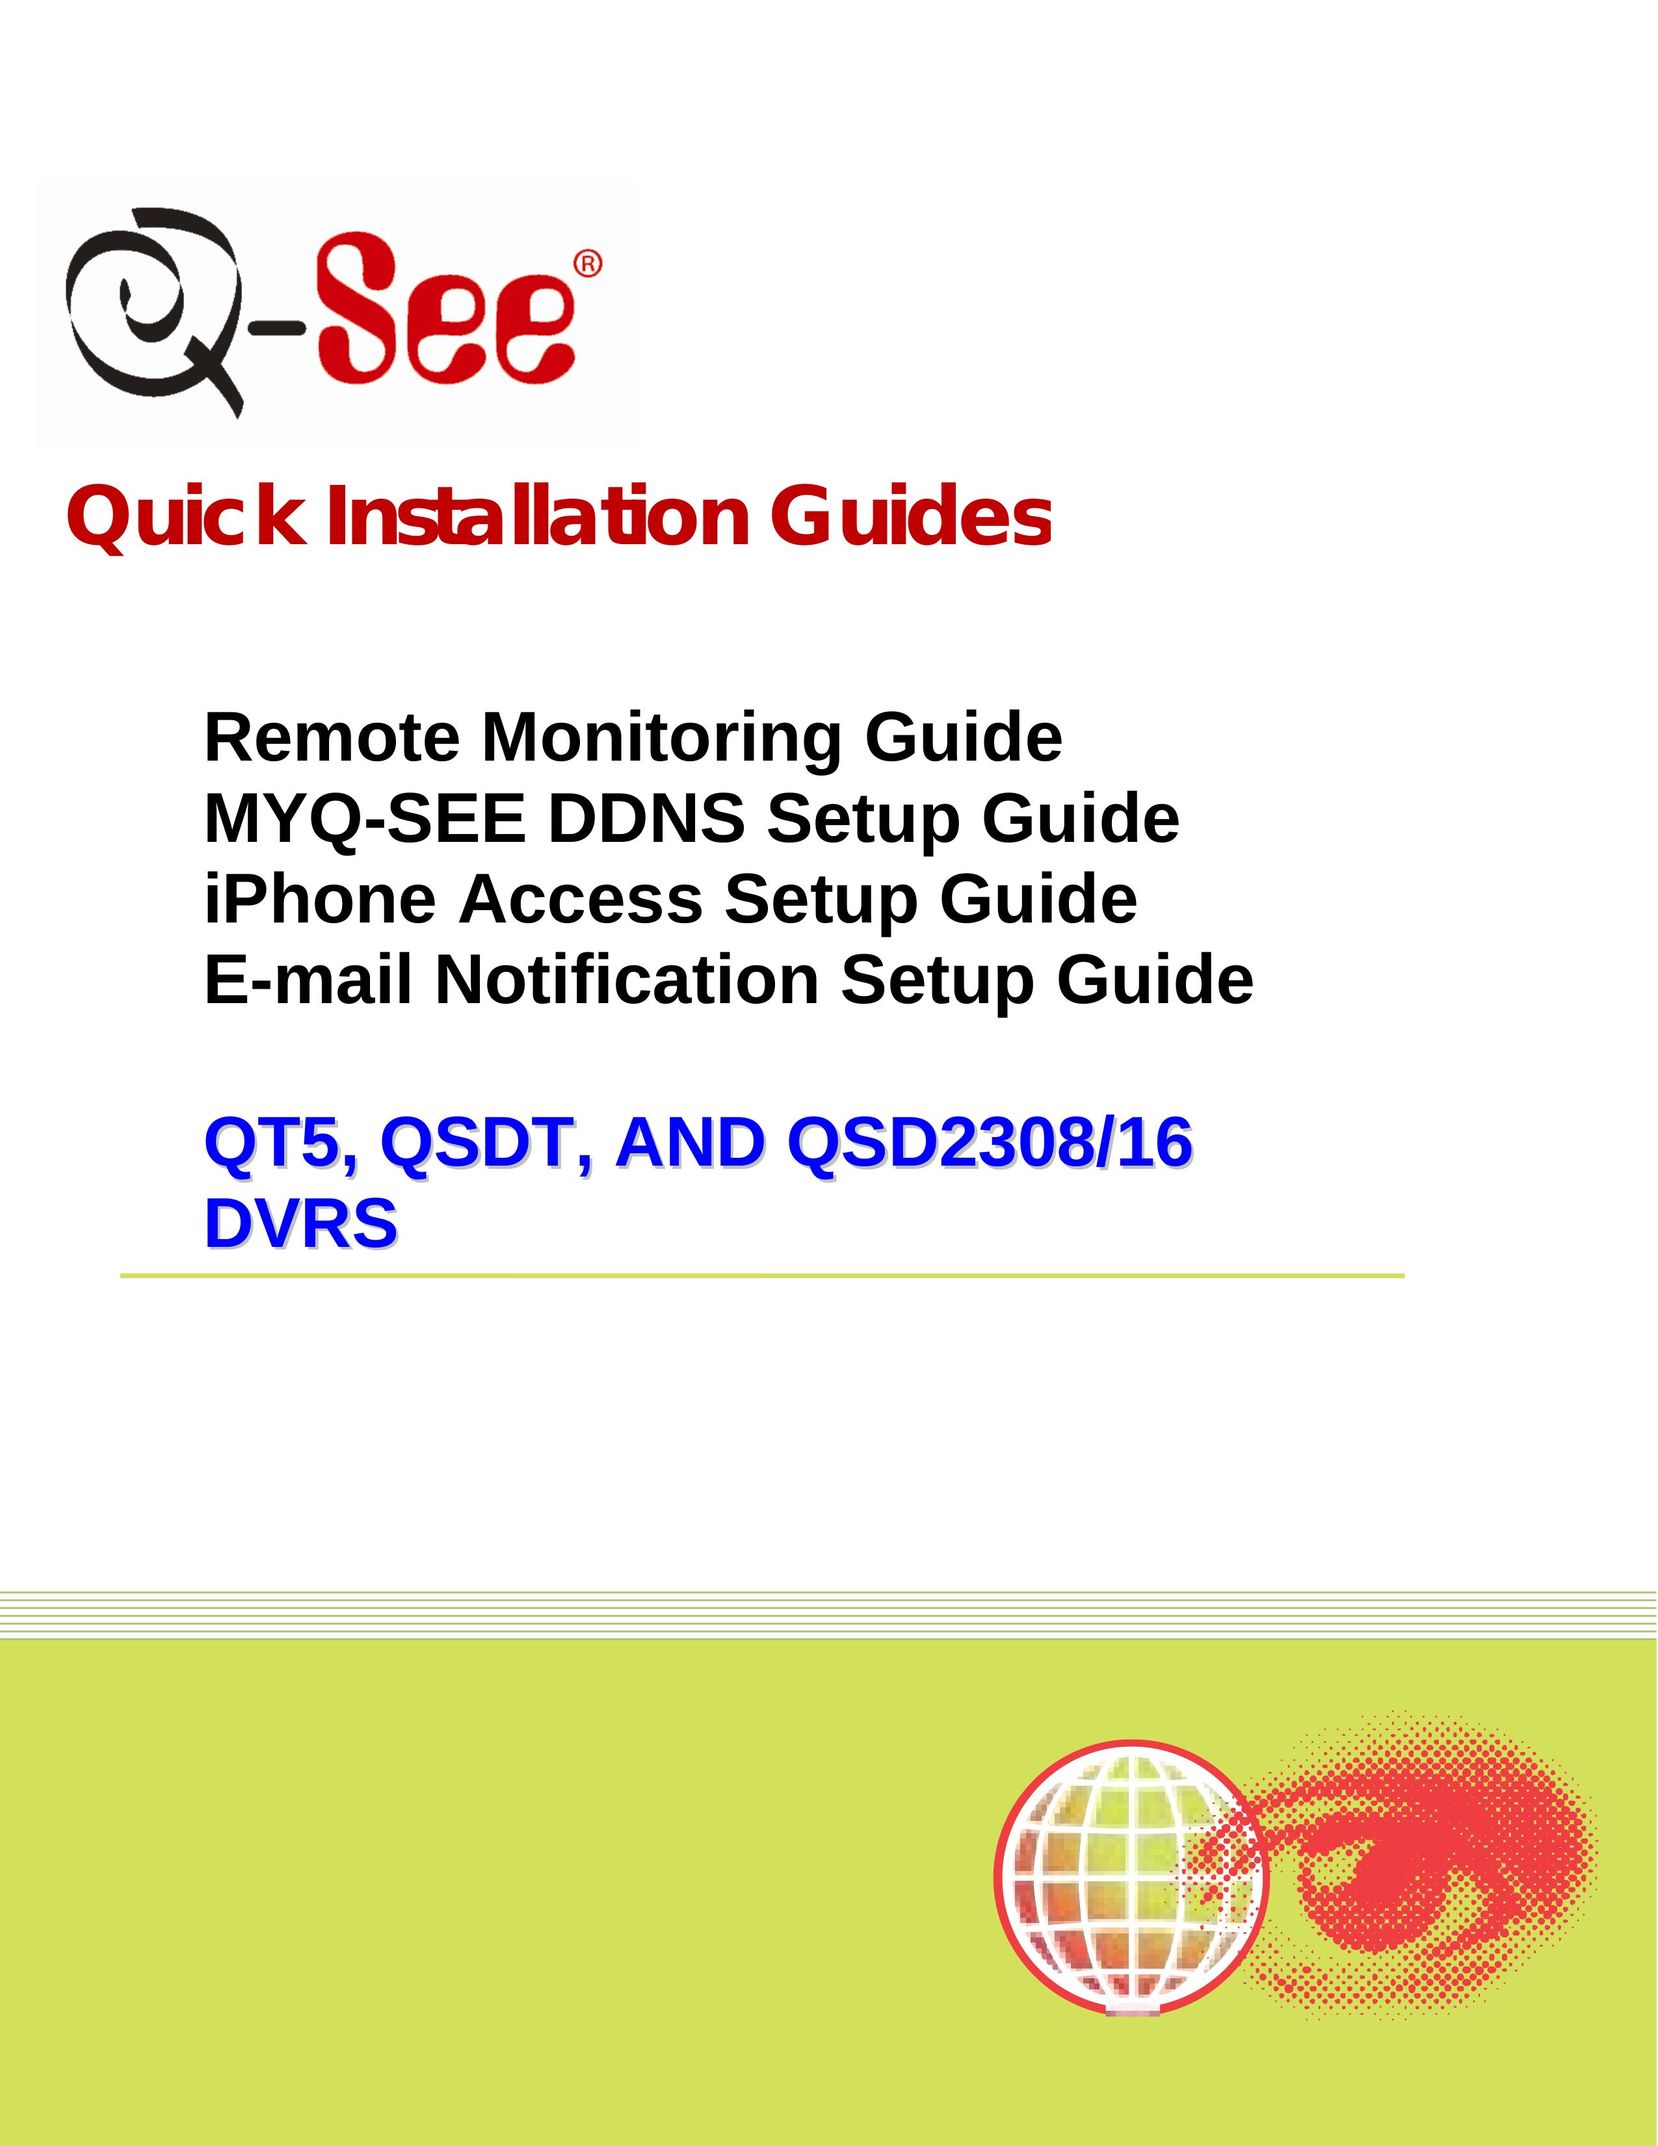 Q-See QSDT Camping Equipment User Manual